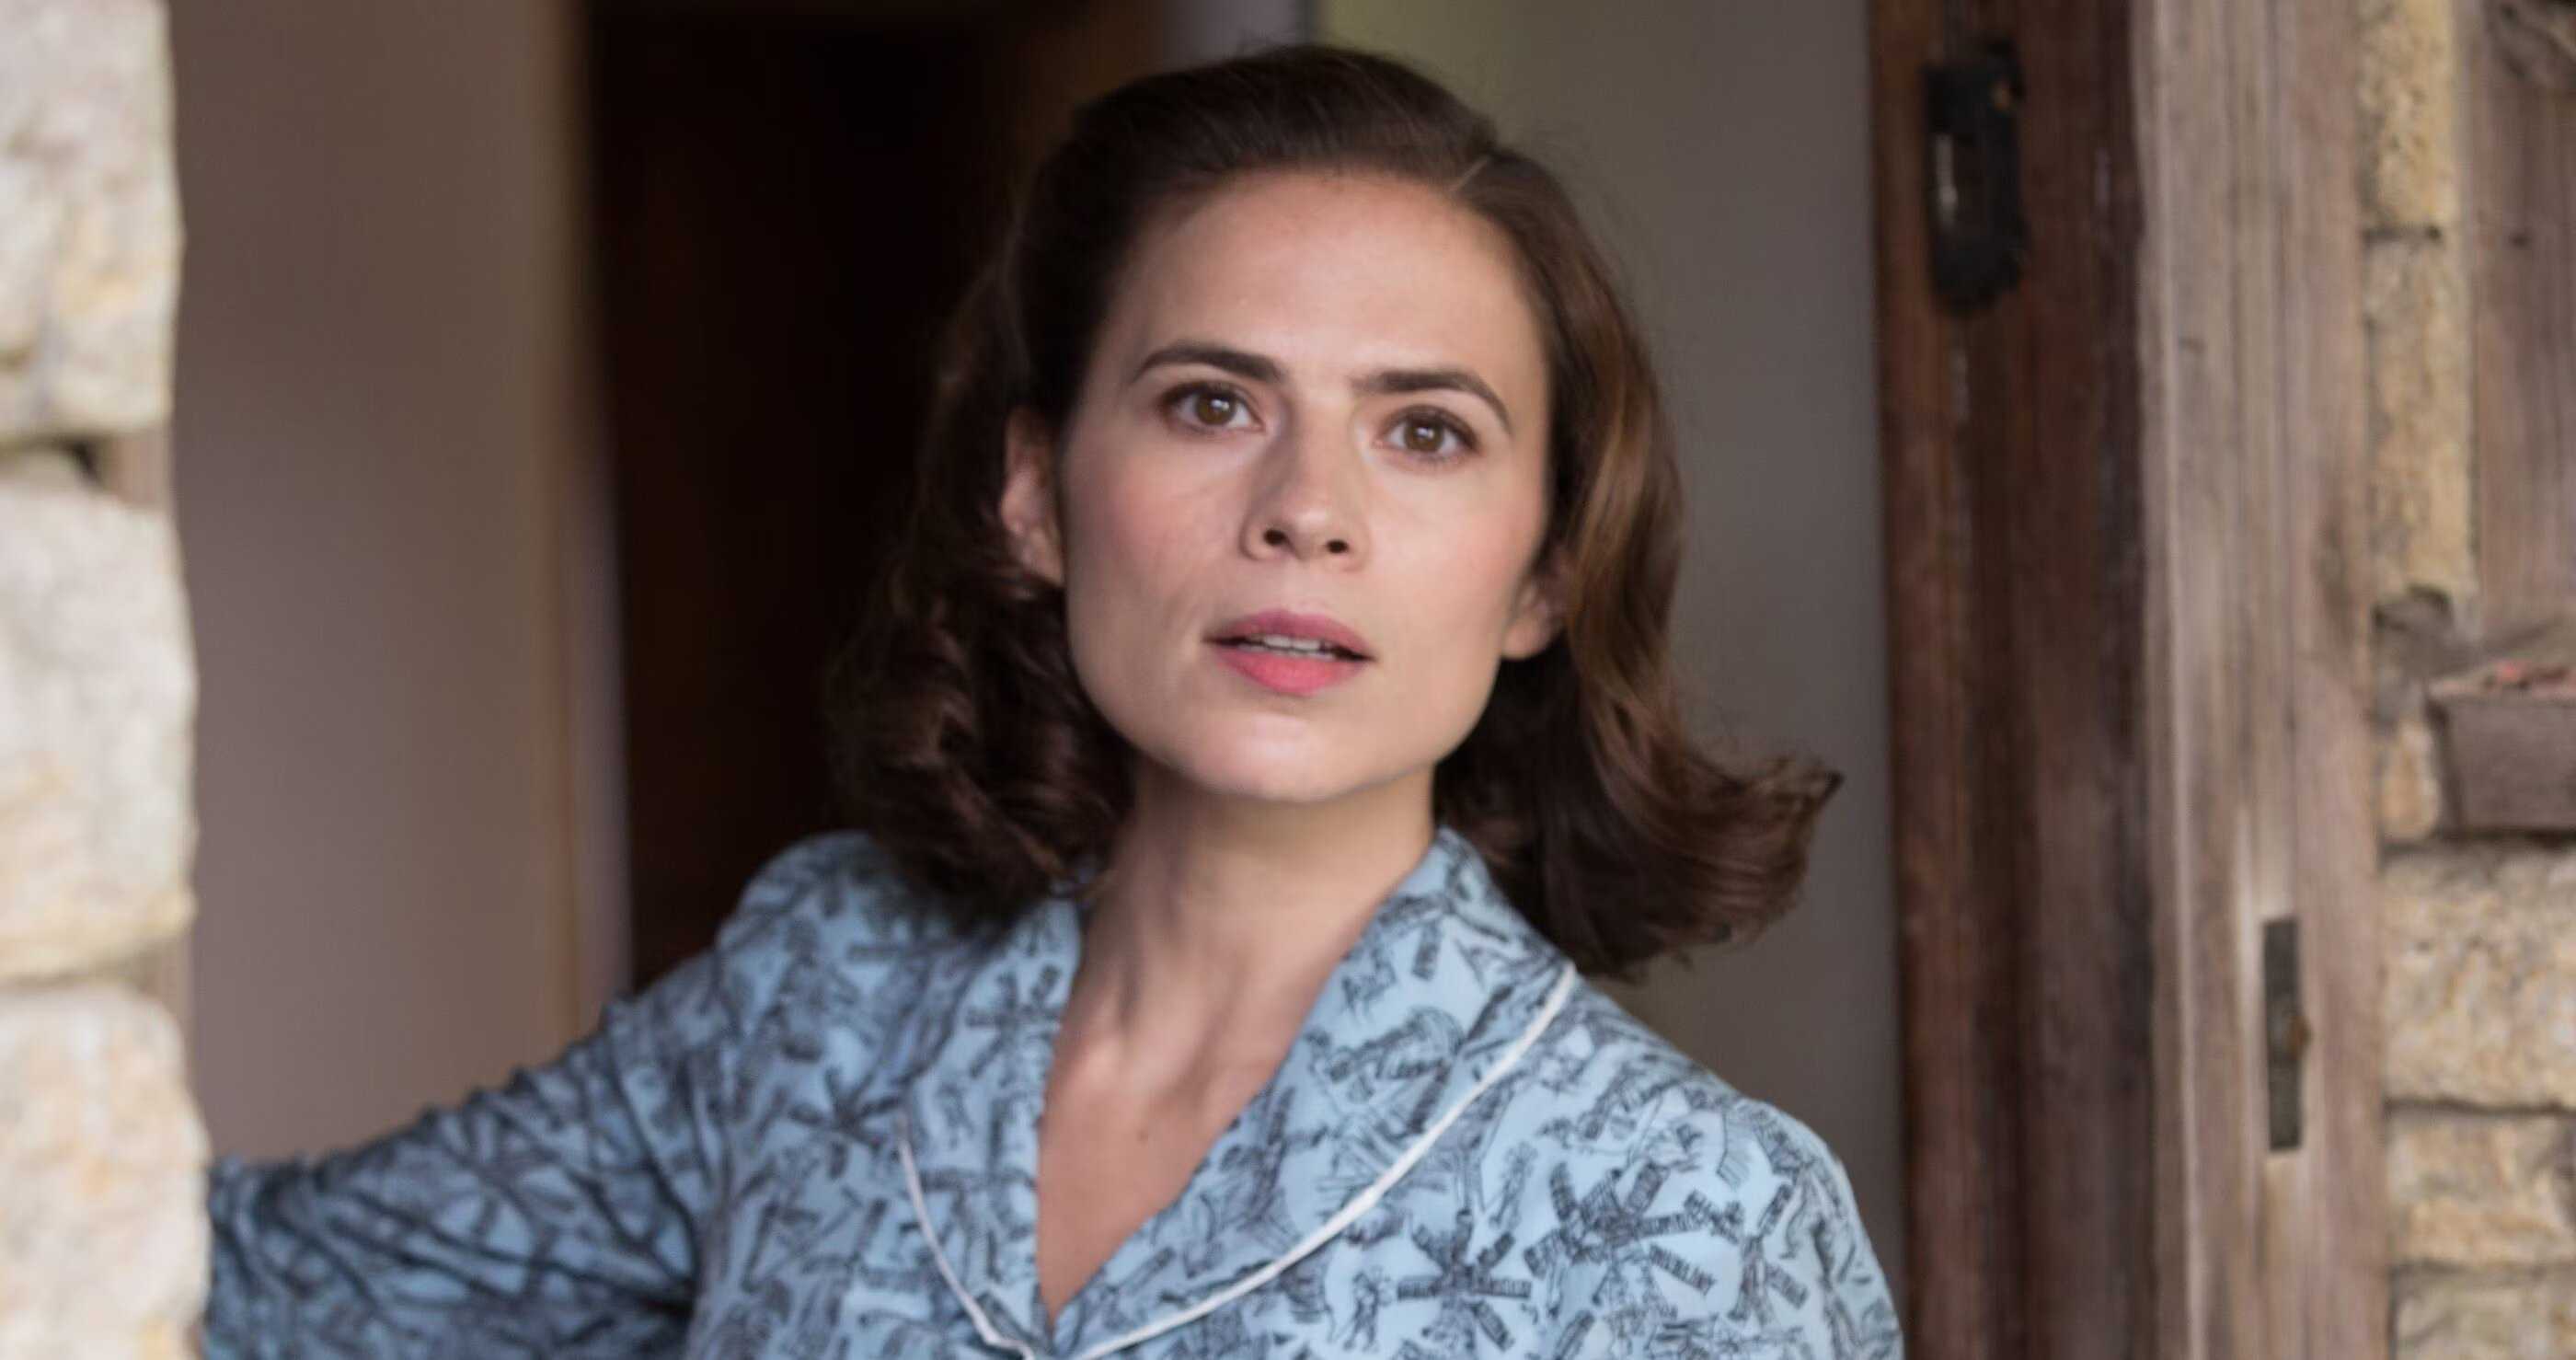 Hayley Atwell juggles Conviction & Agent Carter: Double duty drama!